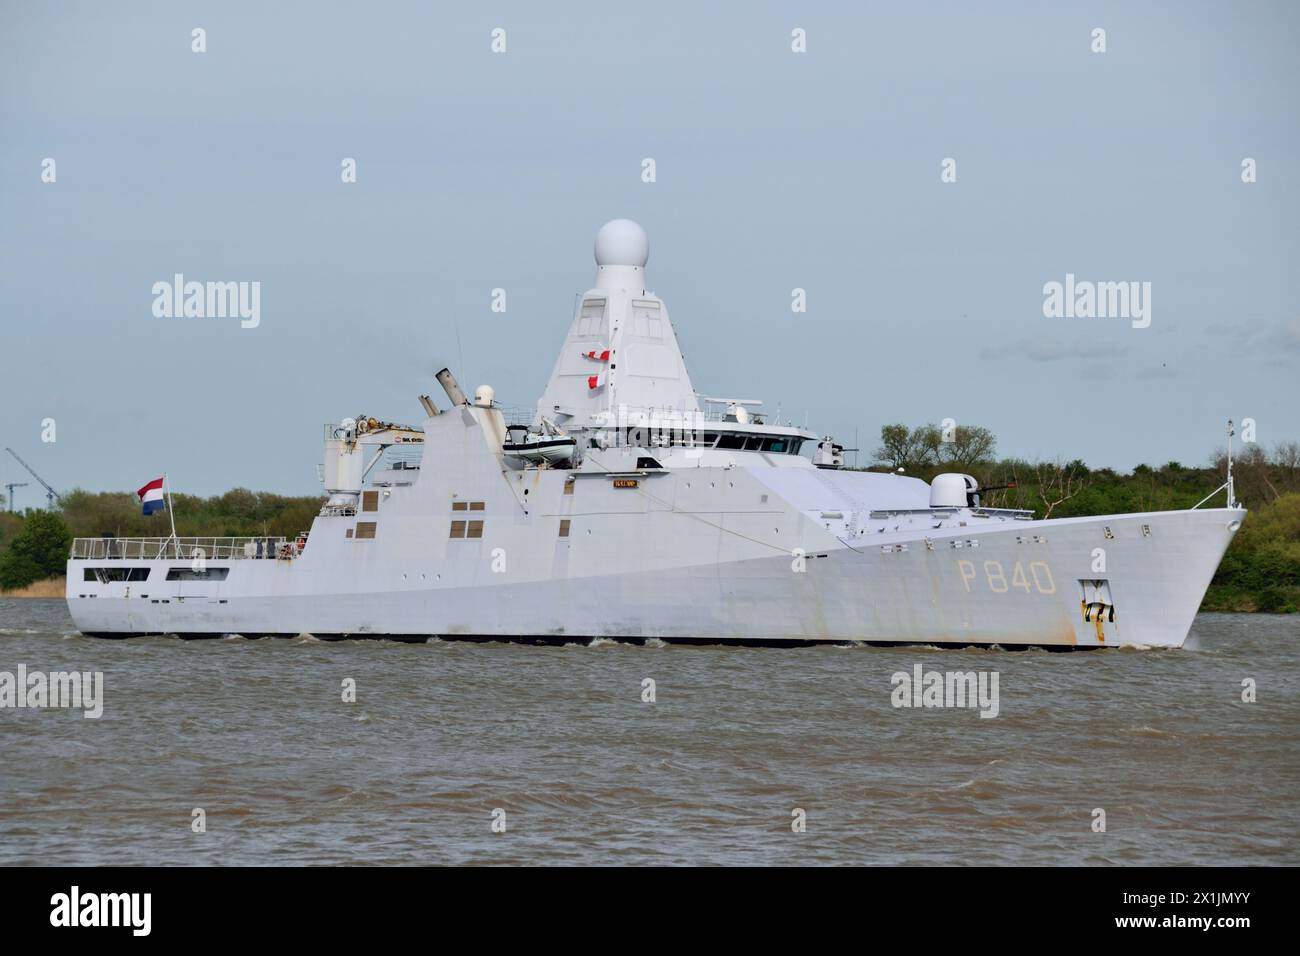 Royal Netherlands Navy Oceangoing Patrol vessels HNLMS HOLLAND seen arriving on the Thames for a port-call in London Stock Photo